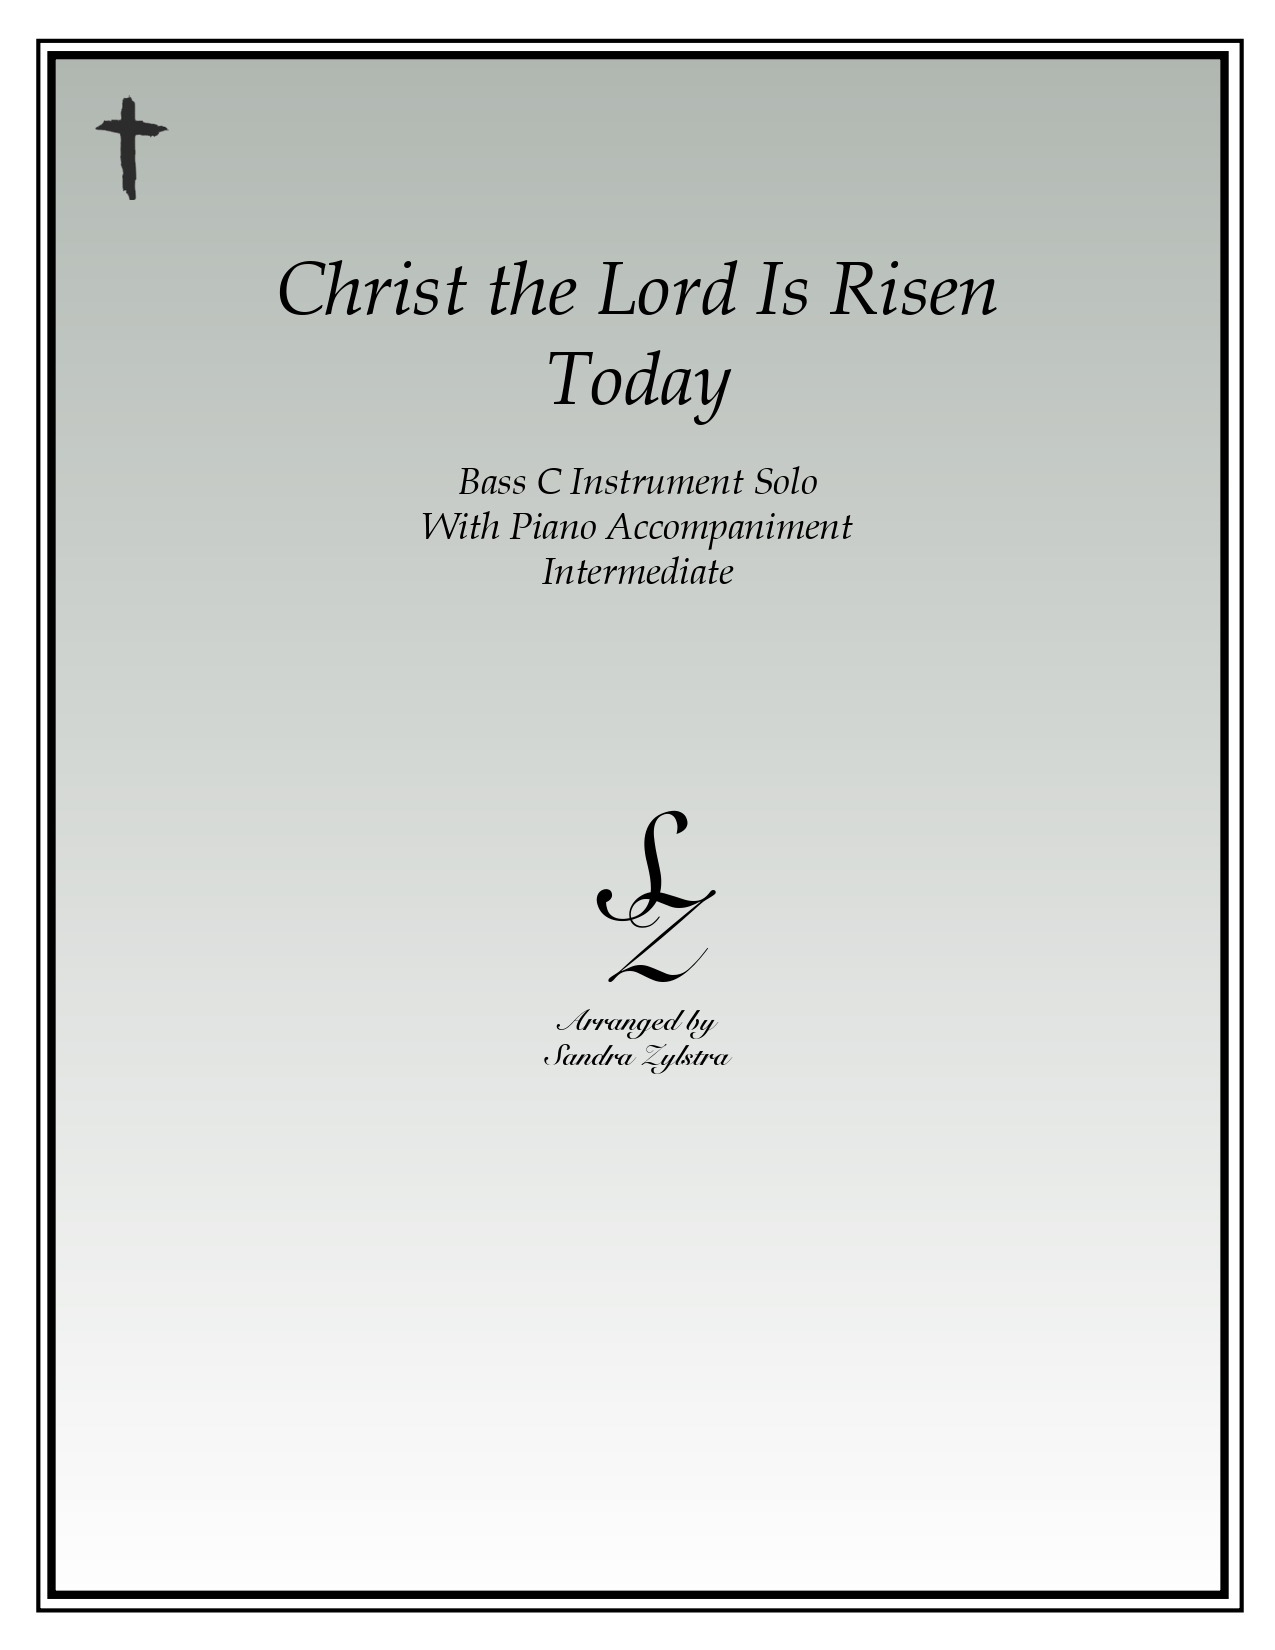 Christ The Lord Is Risen Today bass C instrument solo part cover page 00011